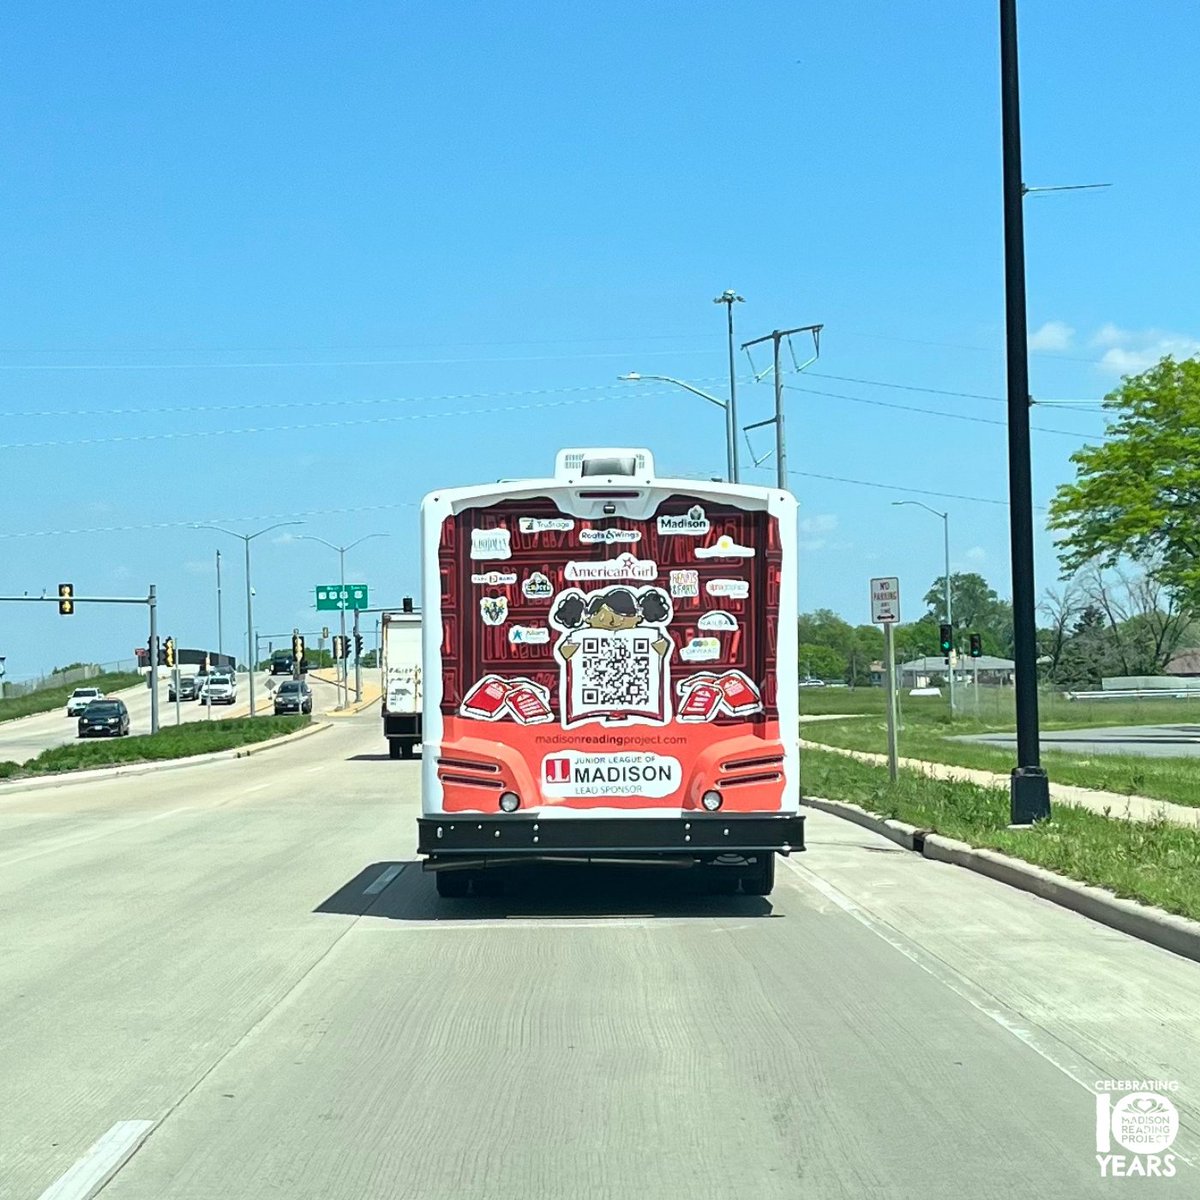 🤩📚 Our fleet just got bigger!! Bus 2.0 has arrived to join Bus 1.0 at the Kohl Center, and our whole fleet is ready to meet the Madison community! Join us from 10:30 am to meet our brand-new, ADA-compliant, accessible Book Bus! 💛 #NewBusFeeling #NewBookFeeling #LiteracyMatters